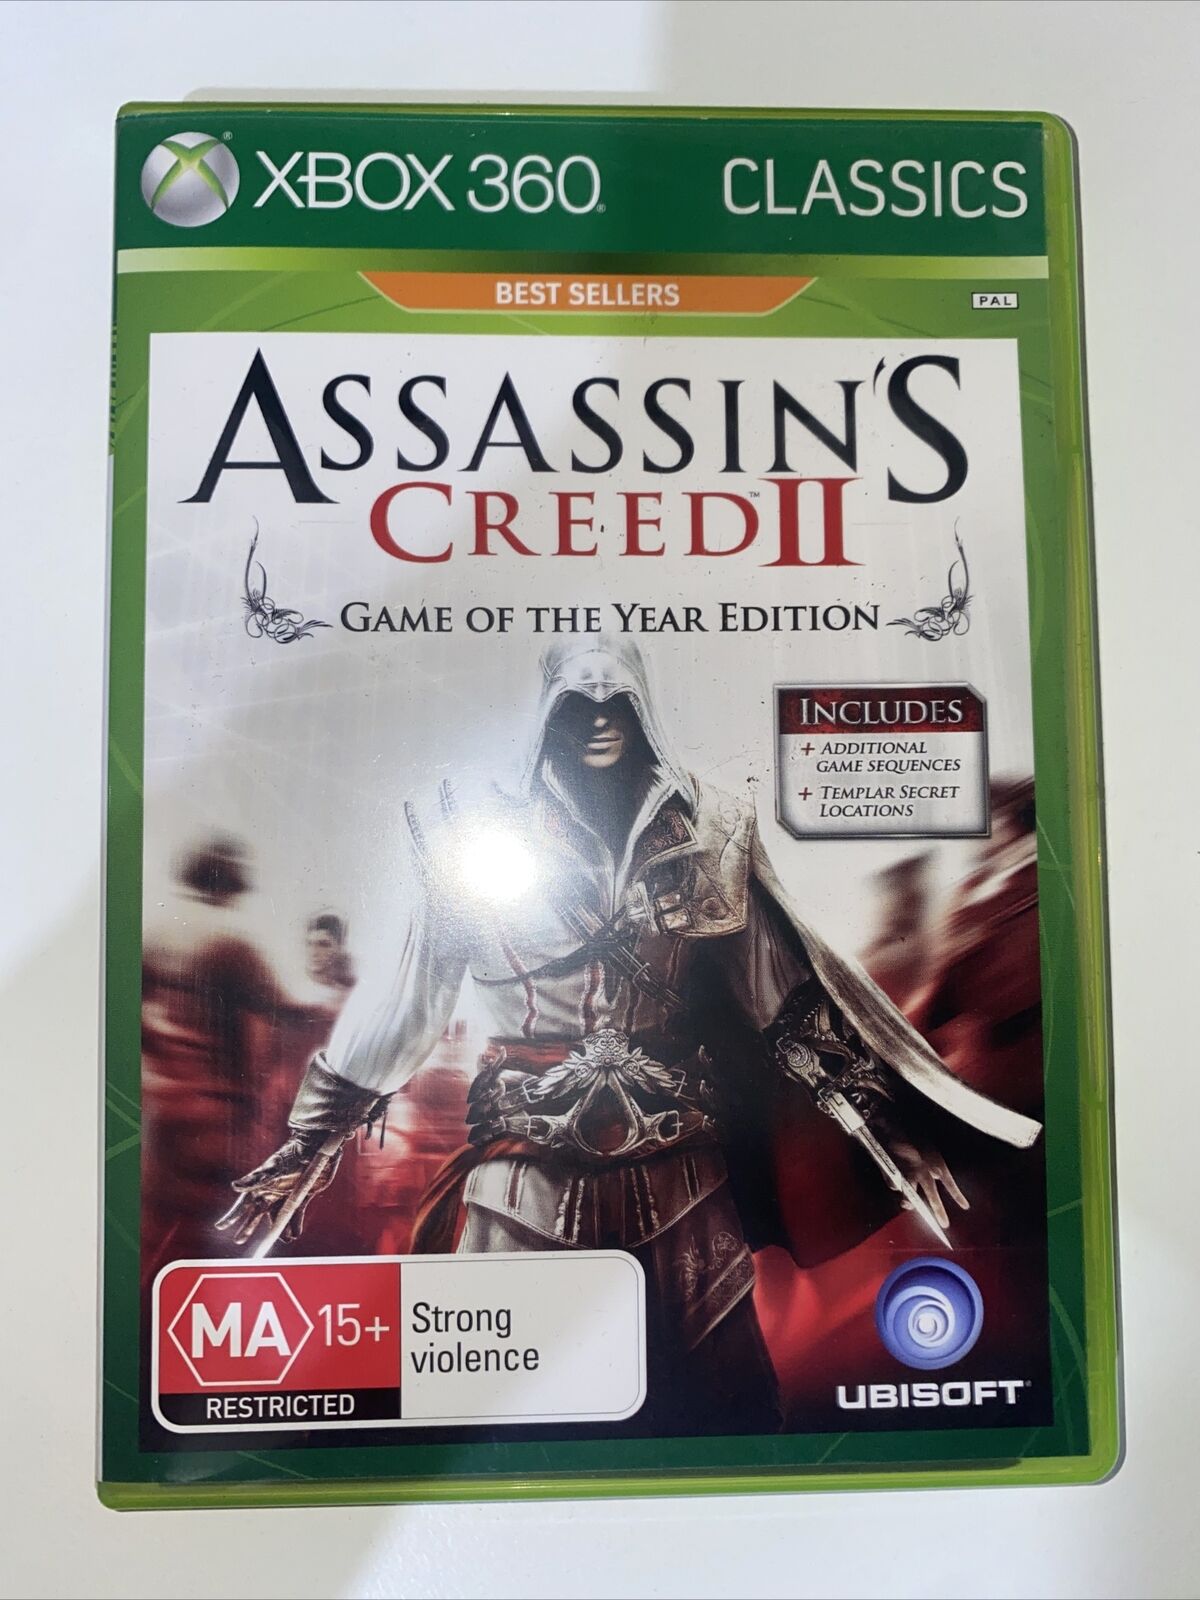 Game | Microsoft Xbox 360 | Assassin's Creed II [Game Of The Year Edition]